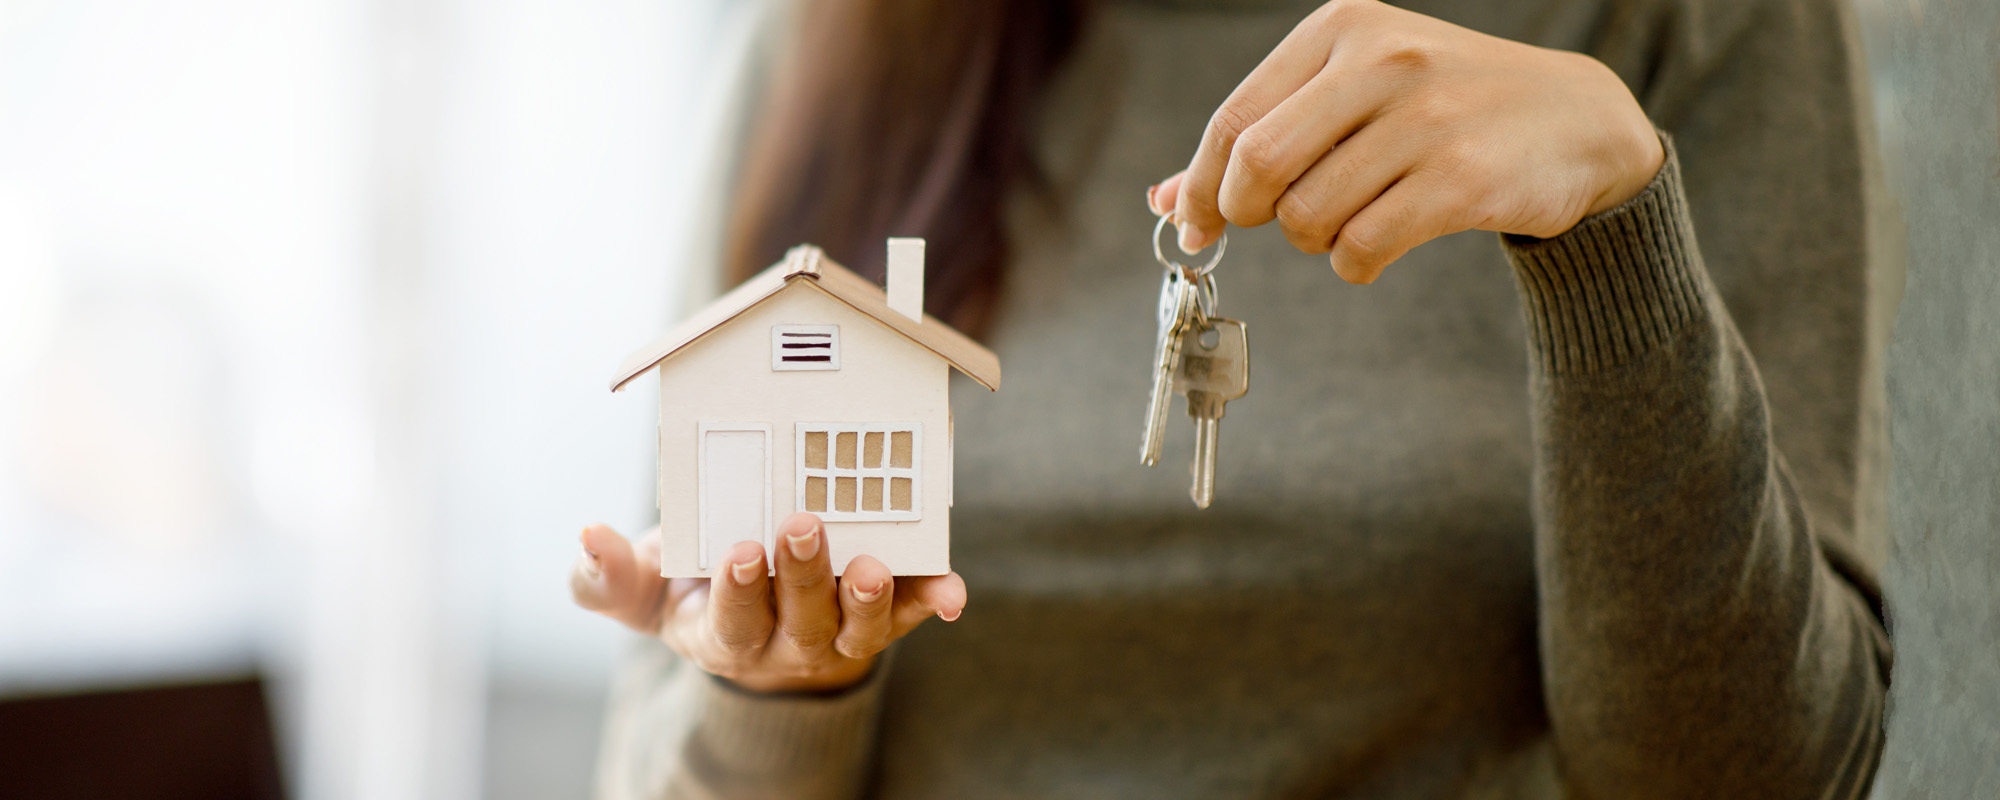 woman hands holding home model mortgage